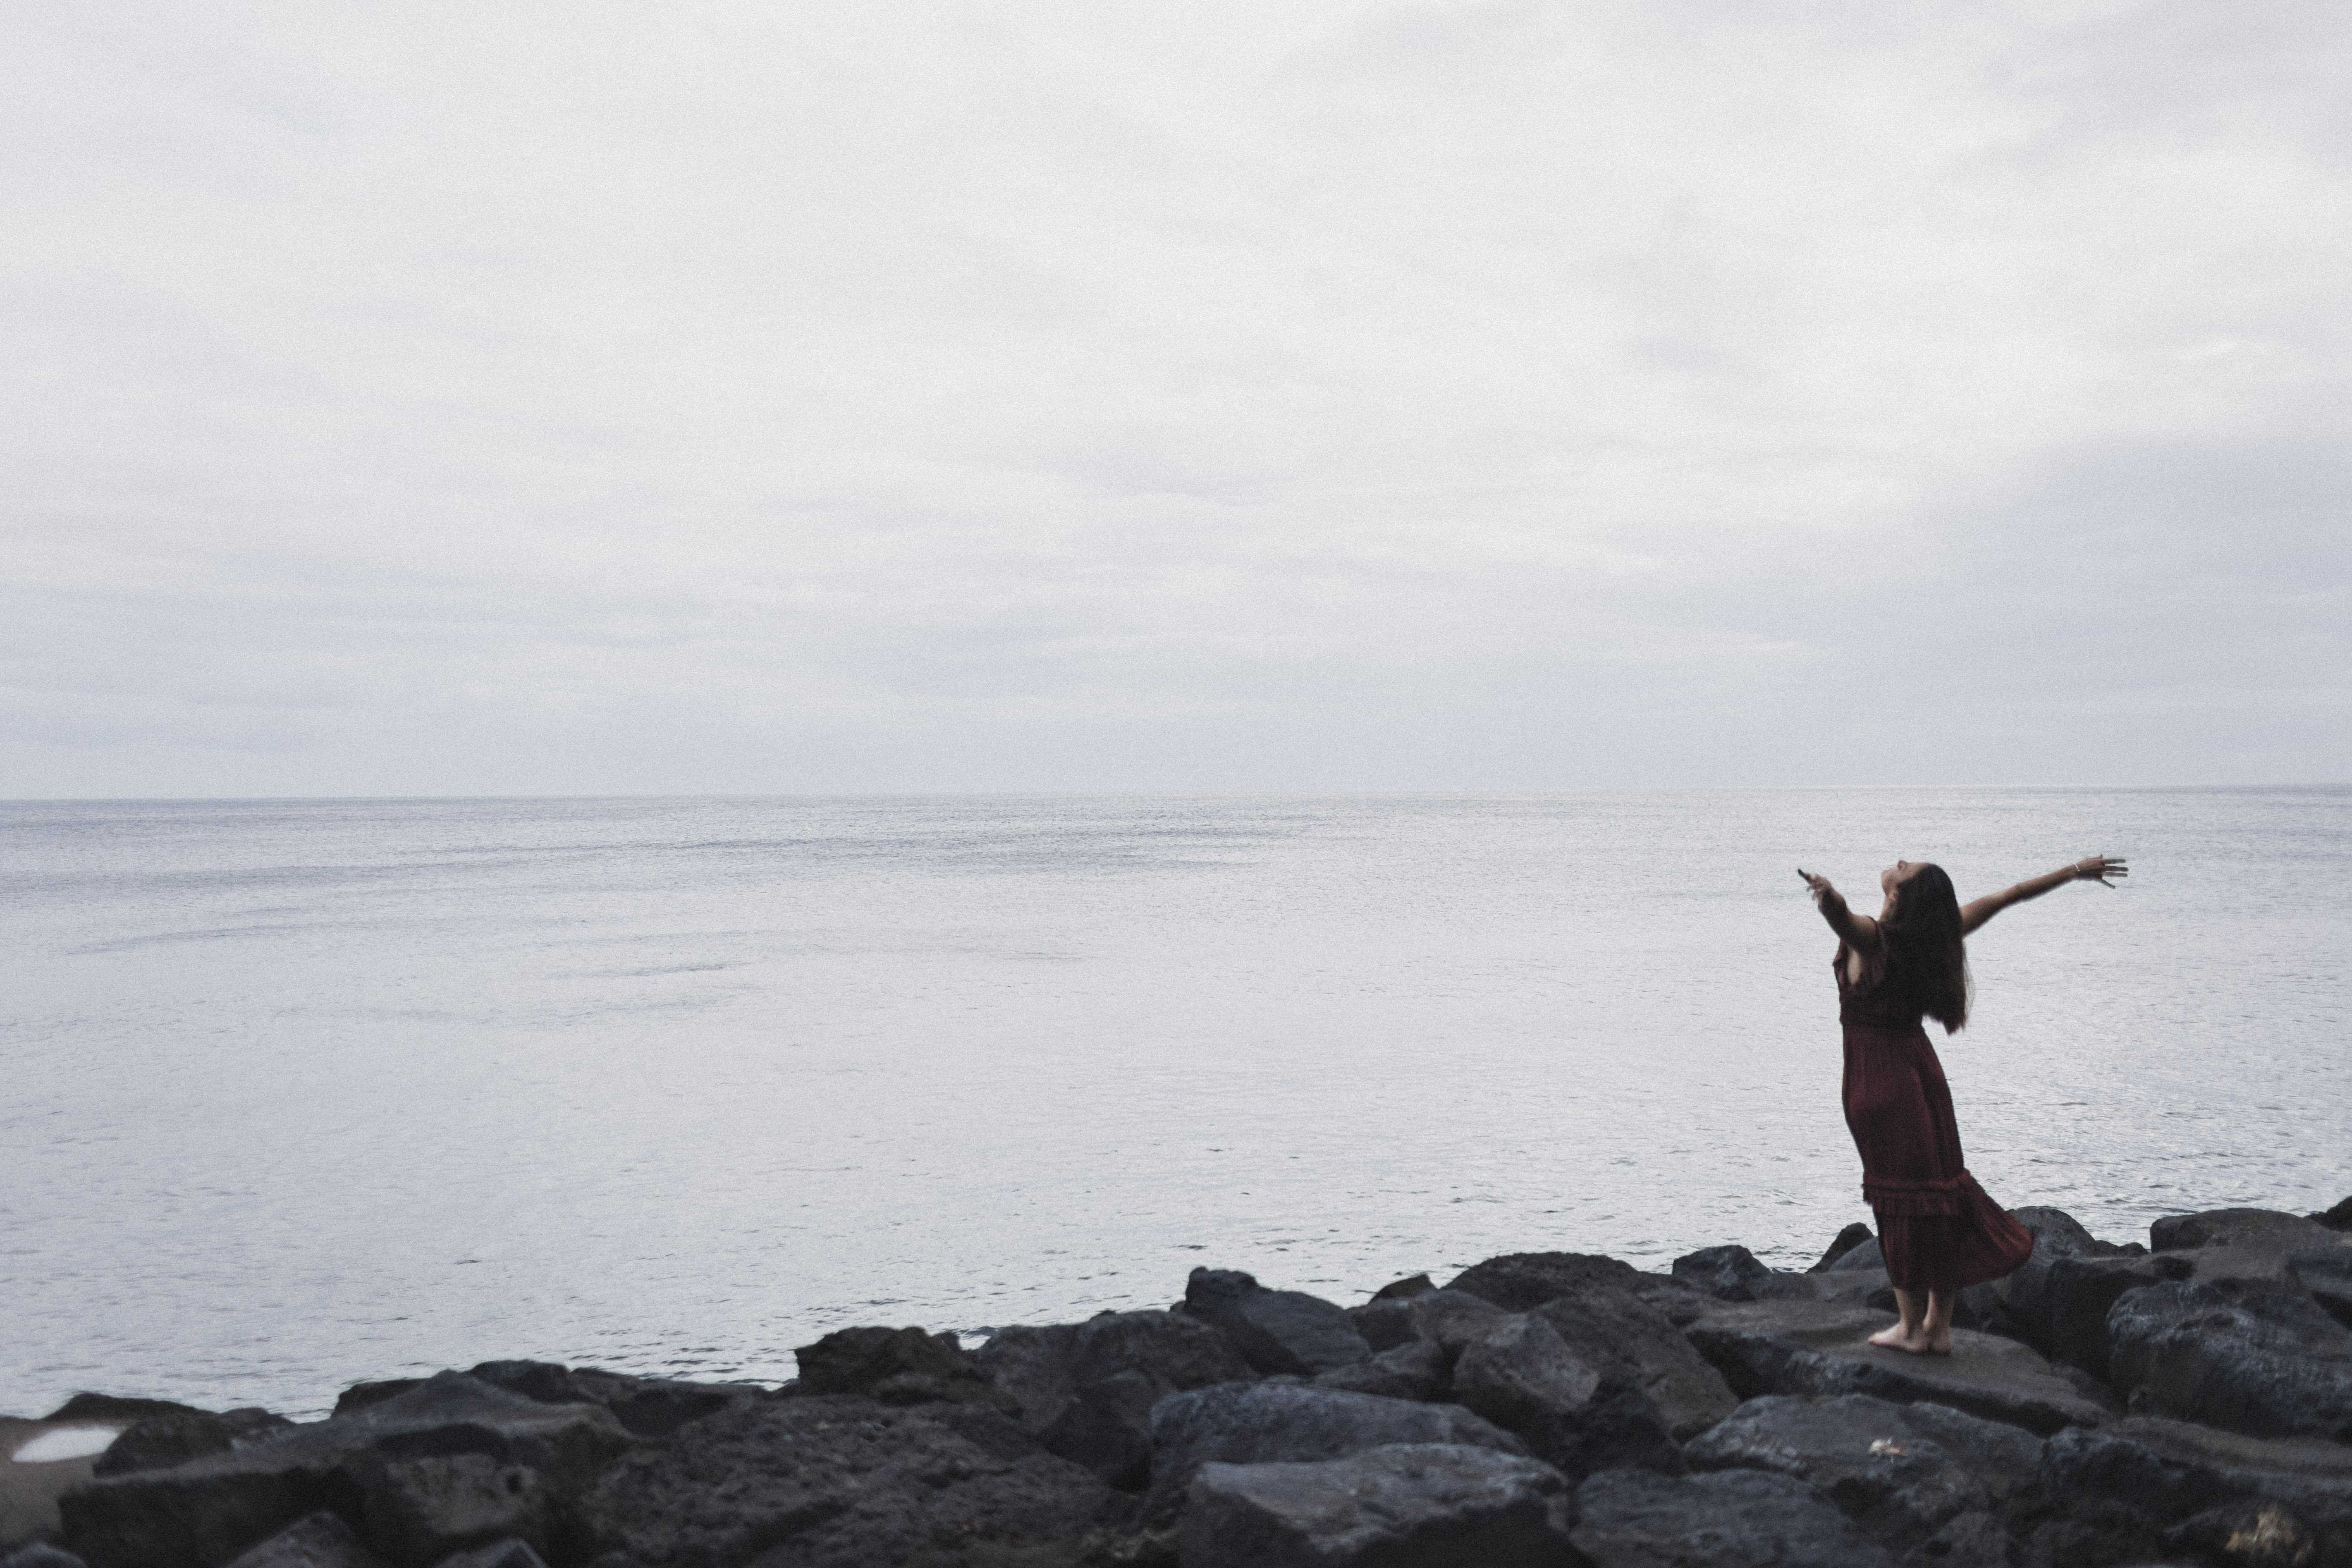 woman standing on volcanic rocks, arms outstretched towards the ocean